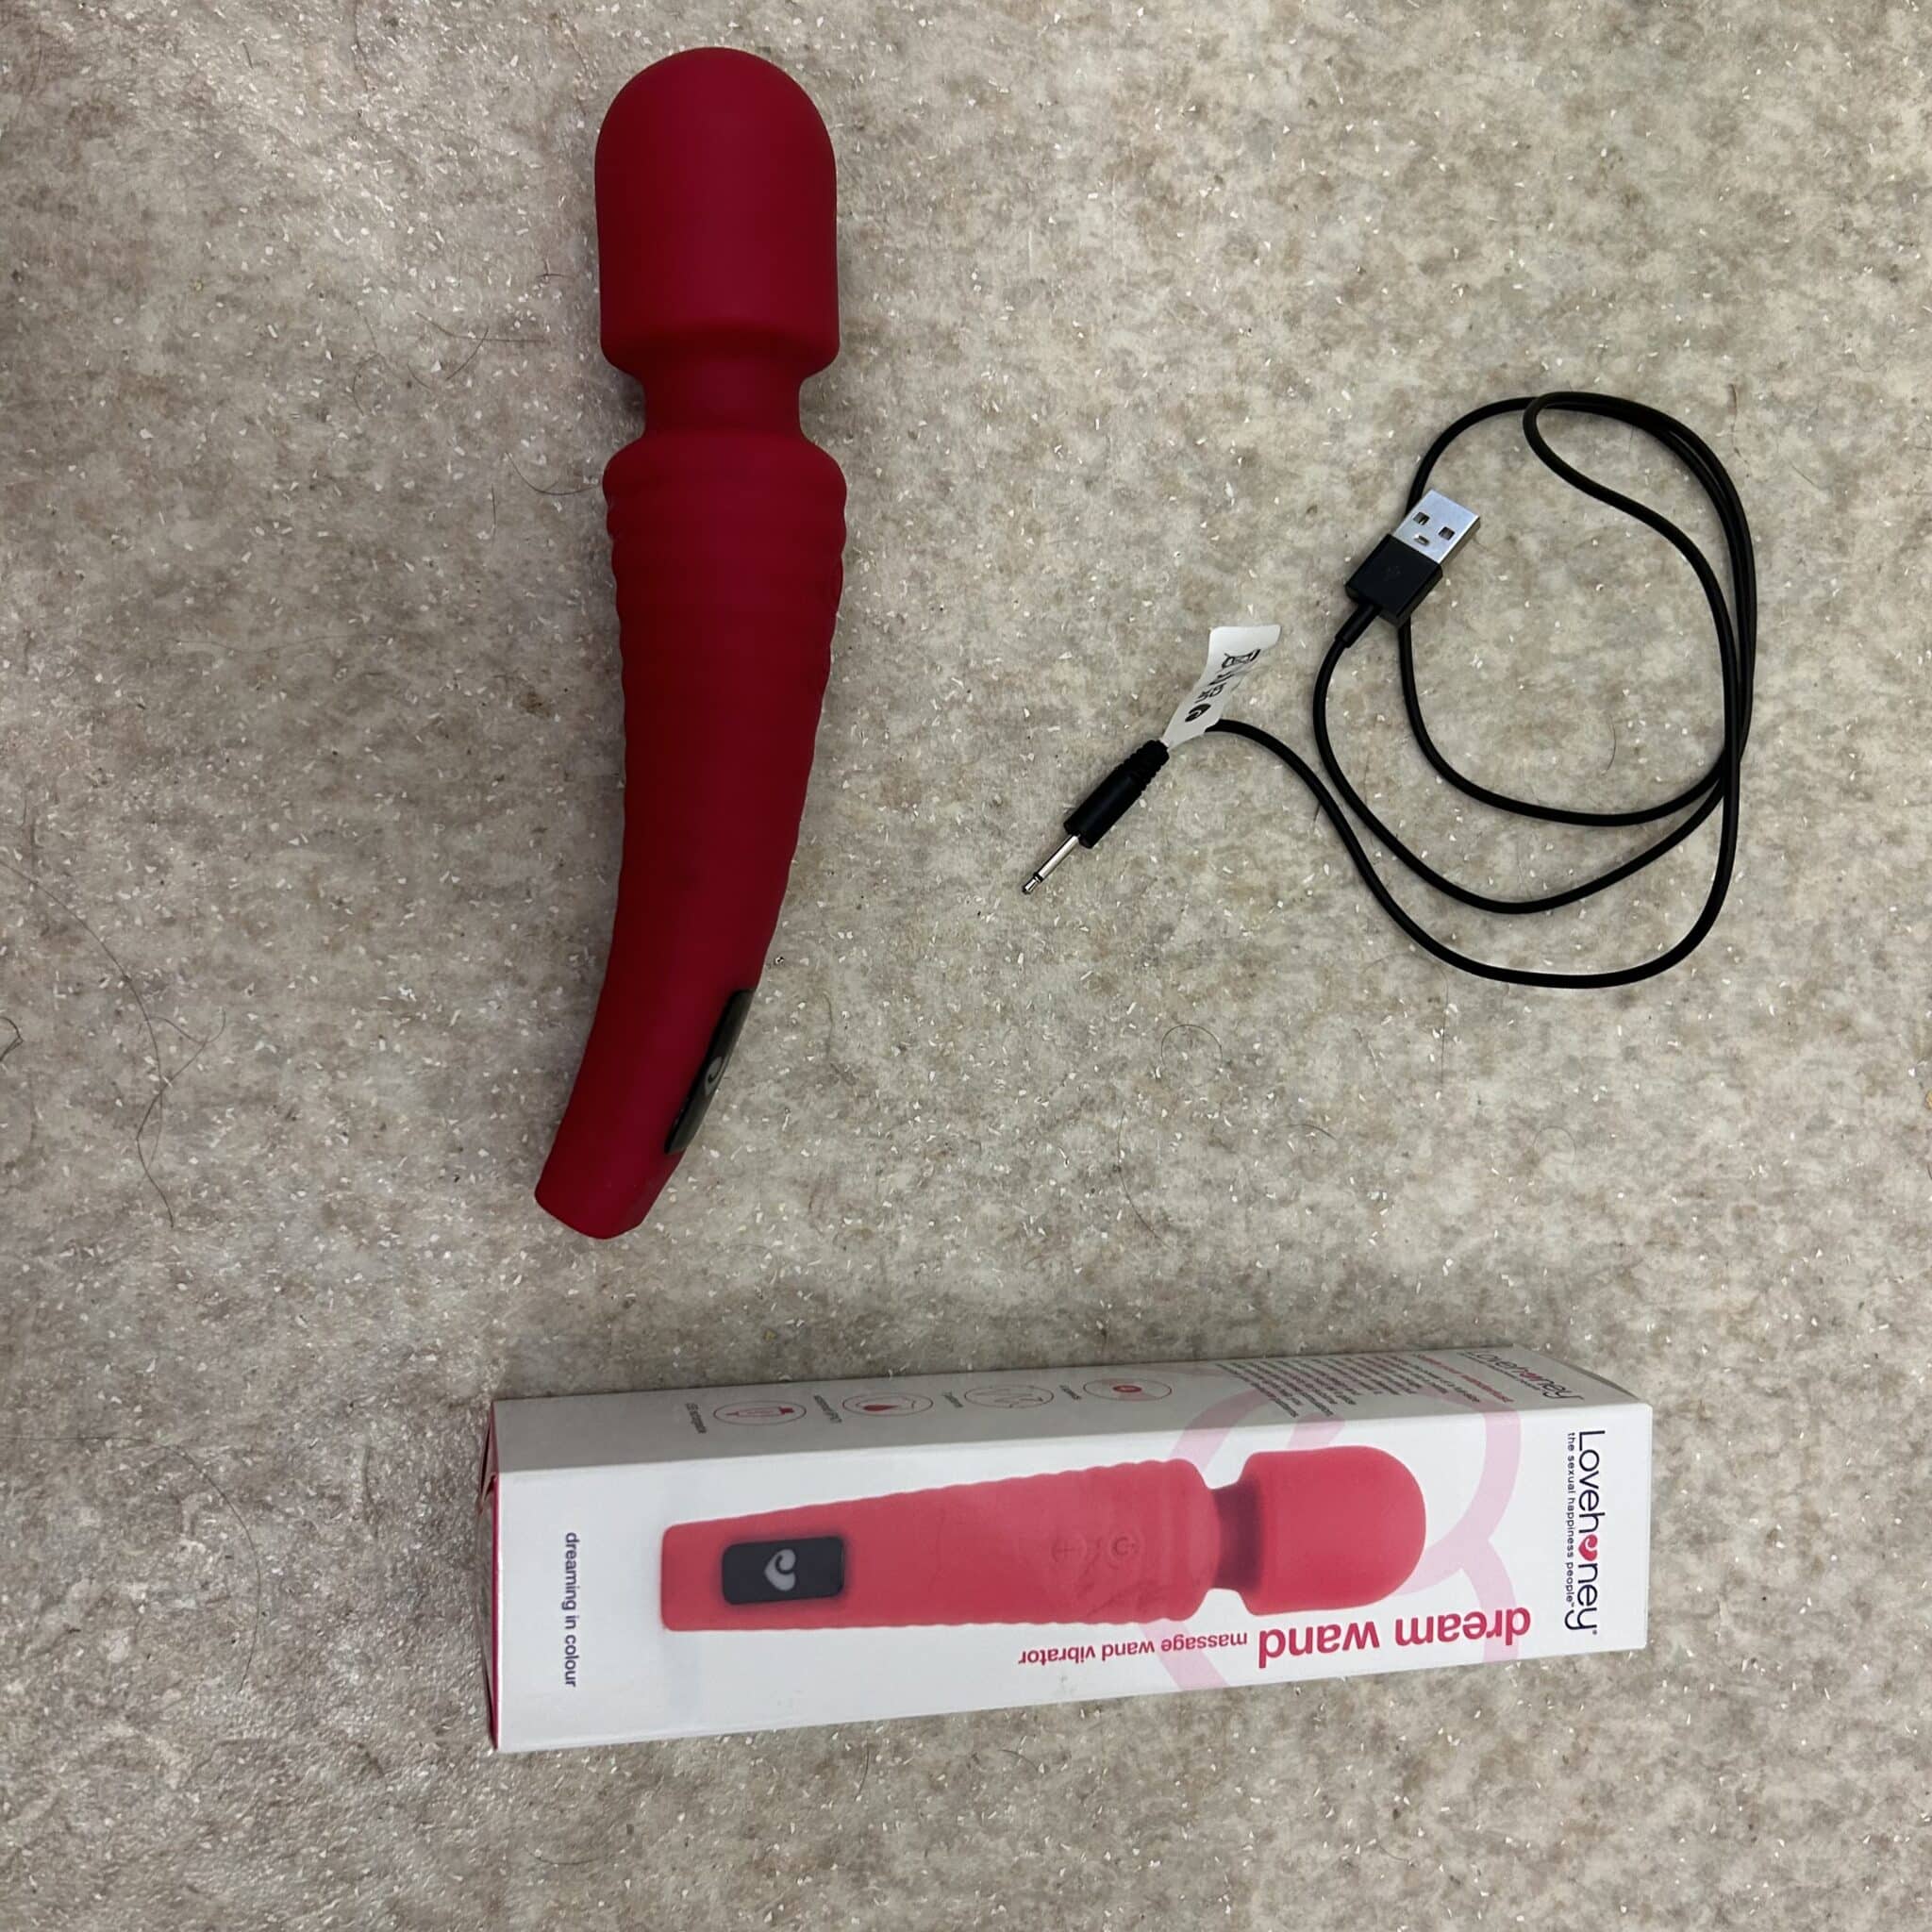 Lovehoney Dream Wand — Test &amp; Review The Price of Lovehoney Dream Wand — Test &amp; Review